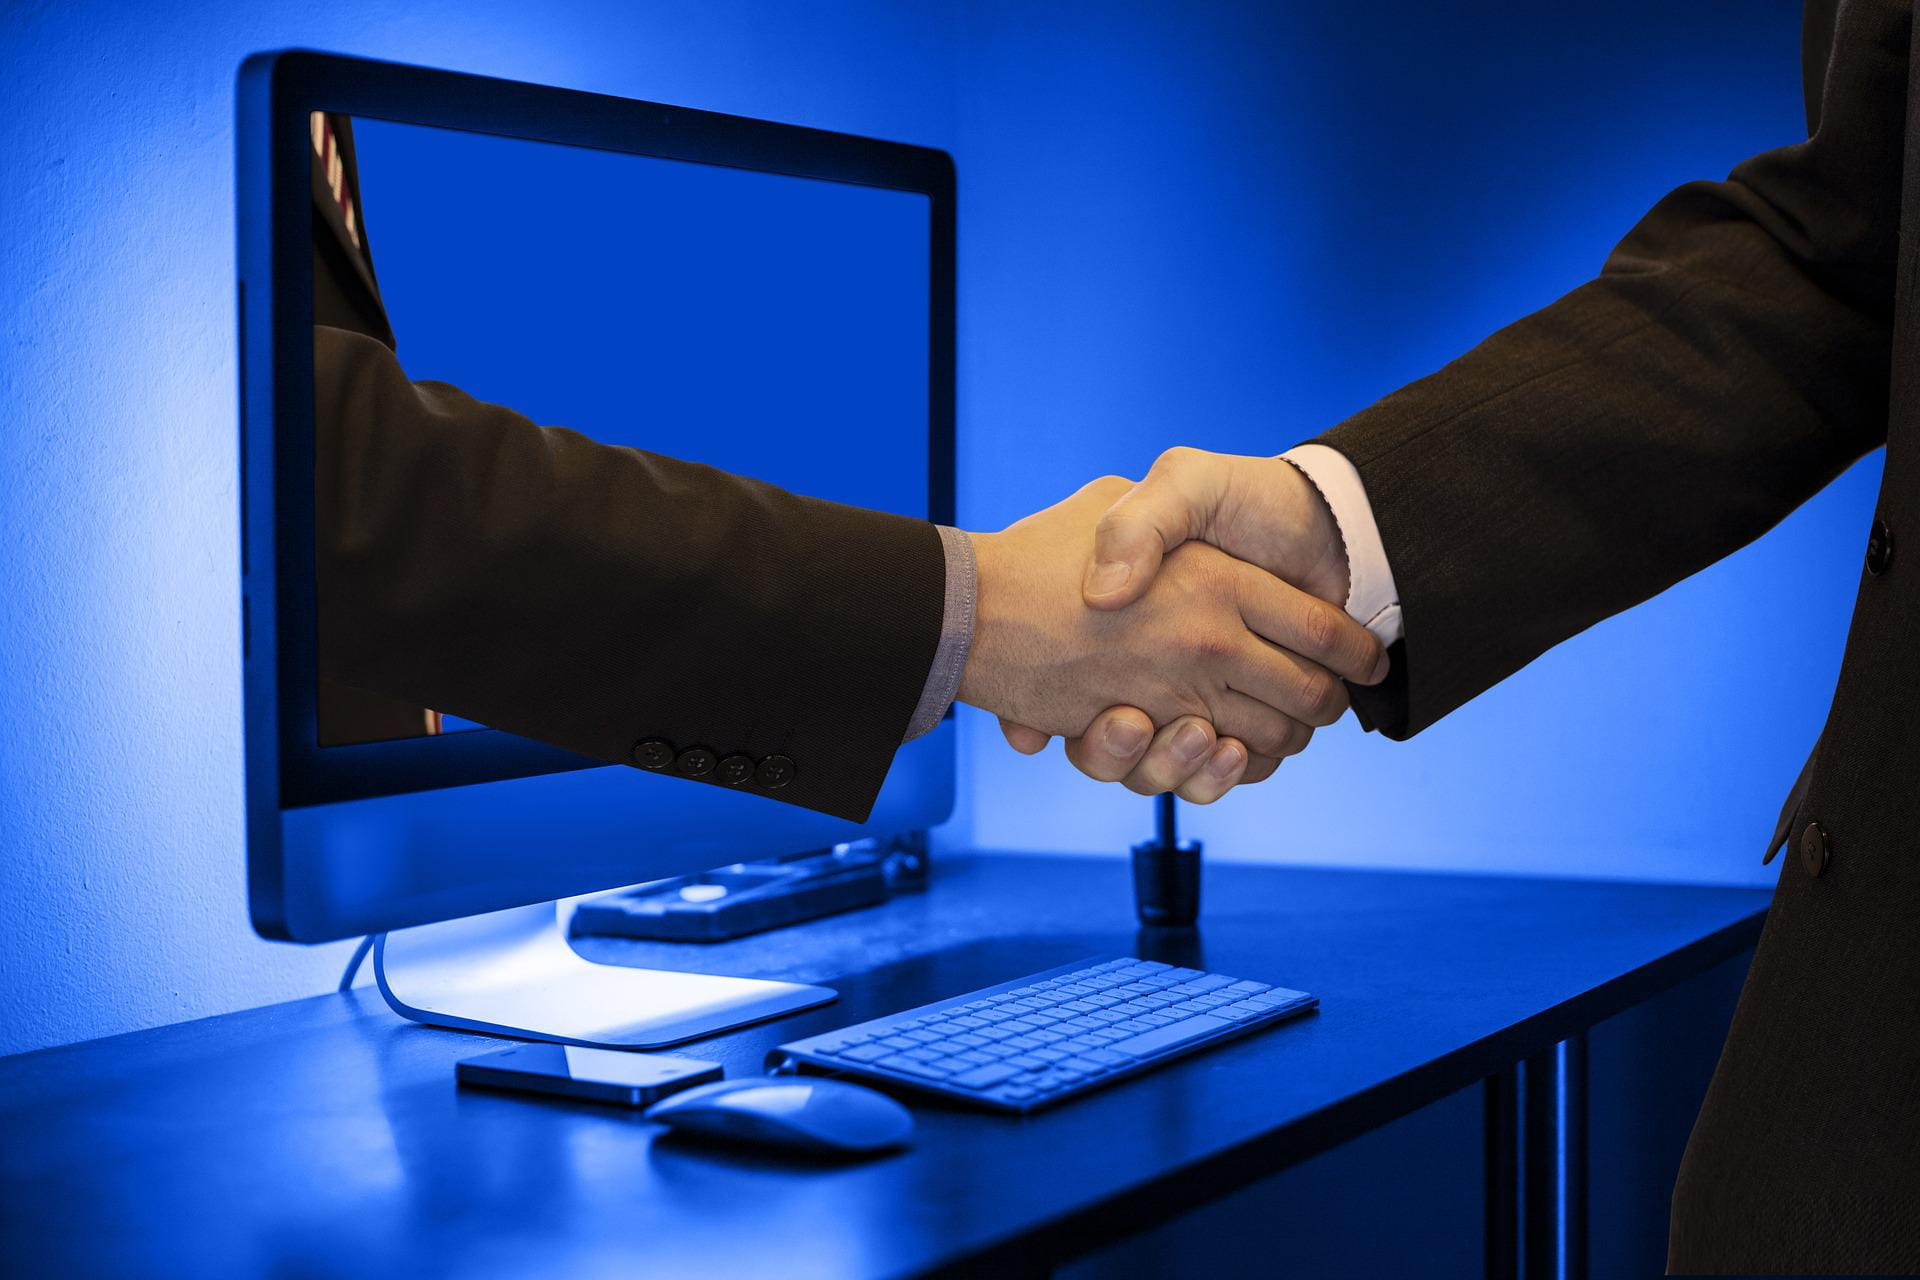 A picture of a virtual handshake between two people